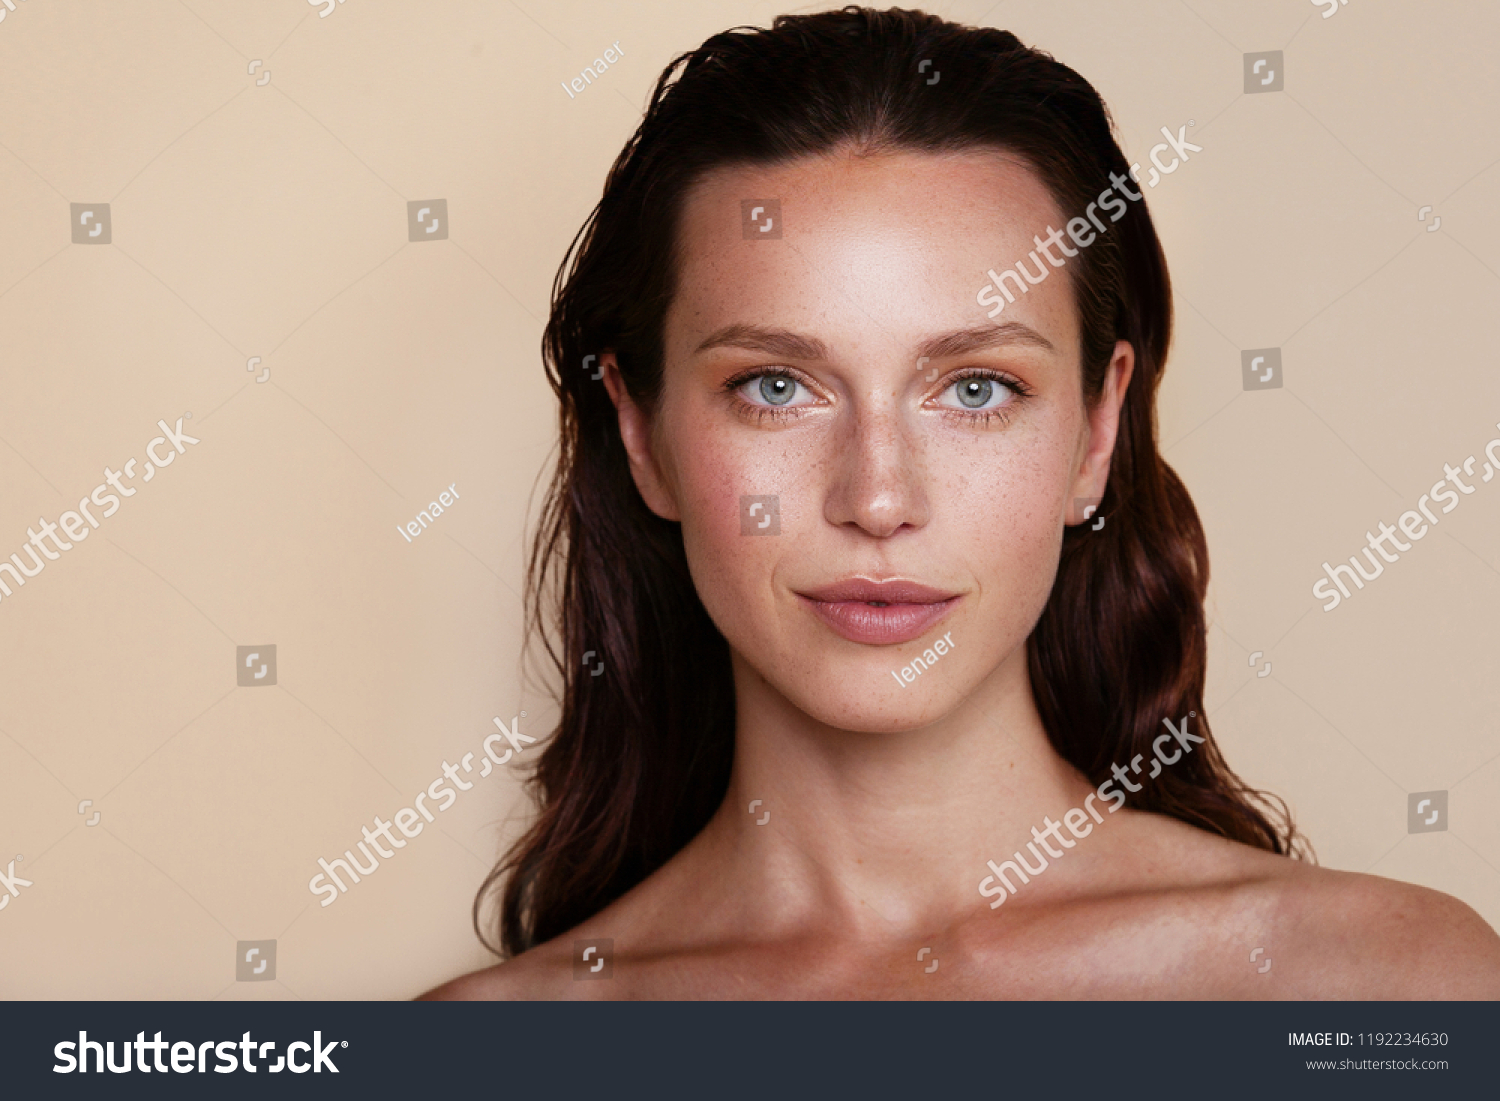 Beauty woman portrait. Beautiful spa model girl with perfect fresh clean skin. Youth and skin care concept. Beige background. Nude makeup #1192234630